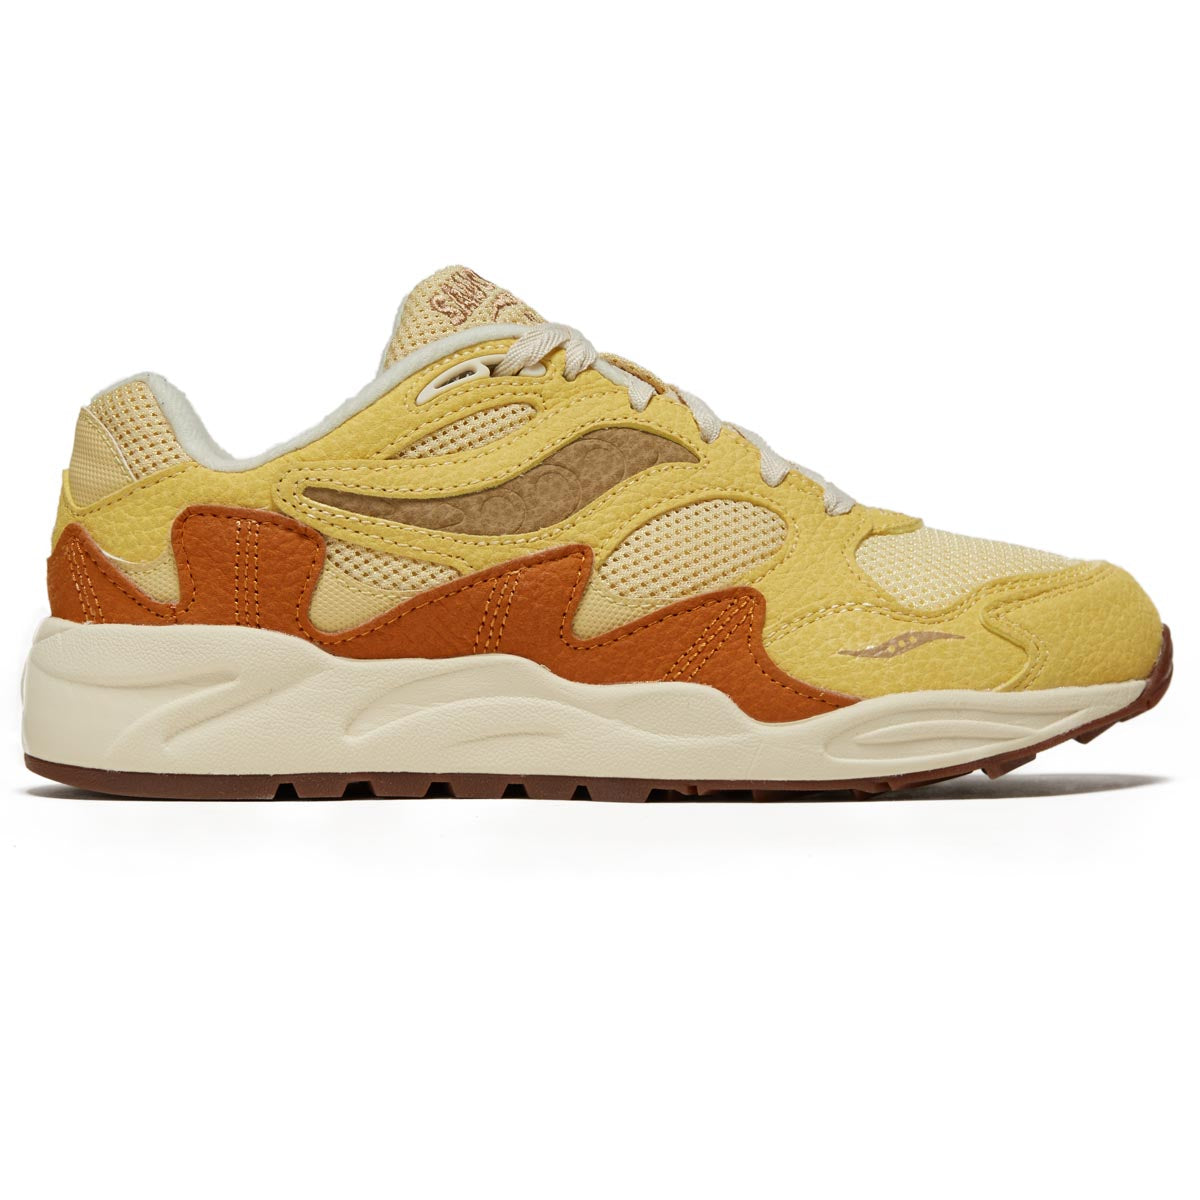 Saucony Grid Shadow 2 Shoes - Mustard/Tan image 1